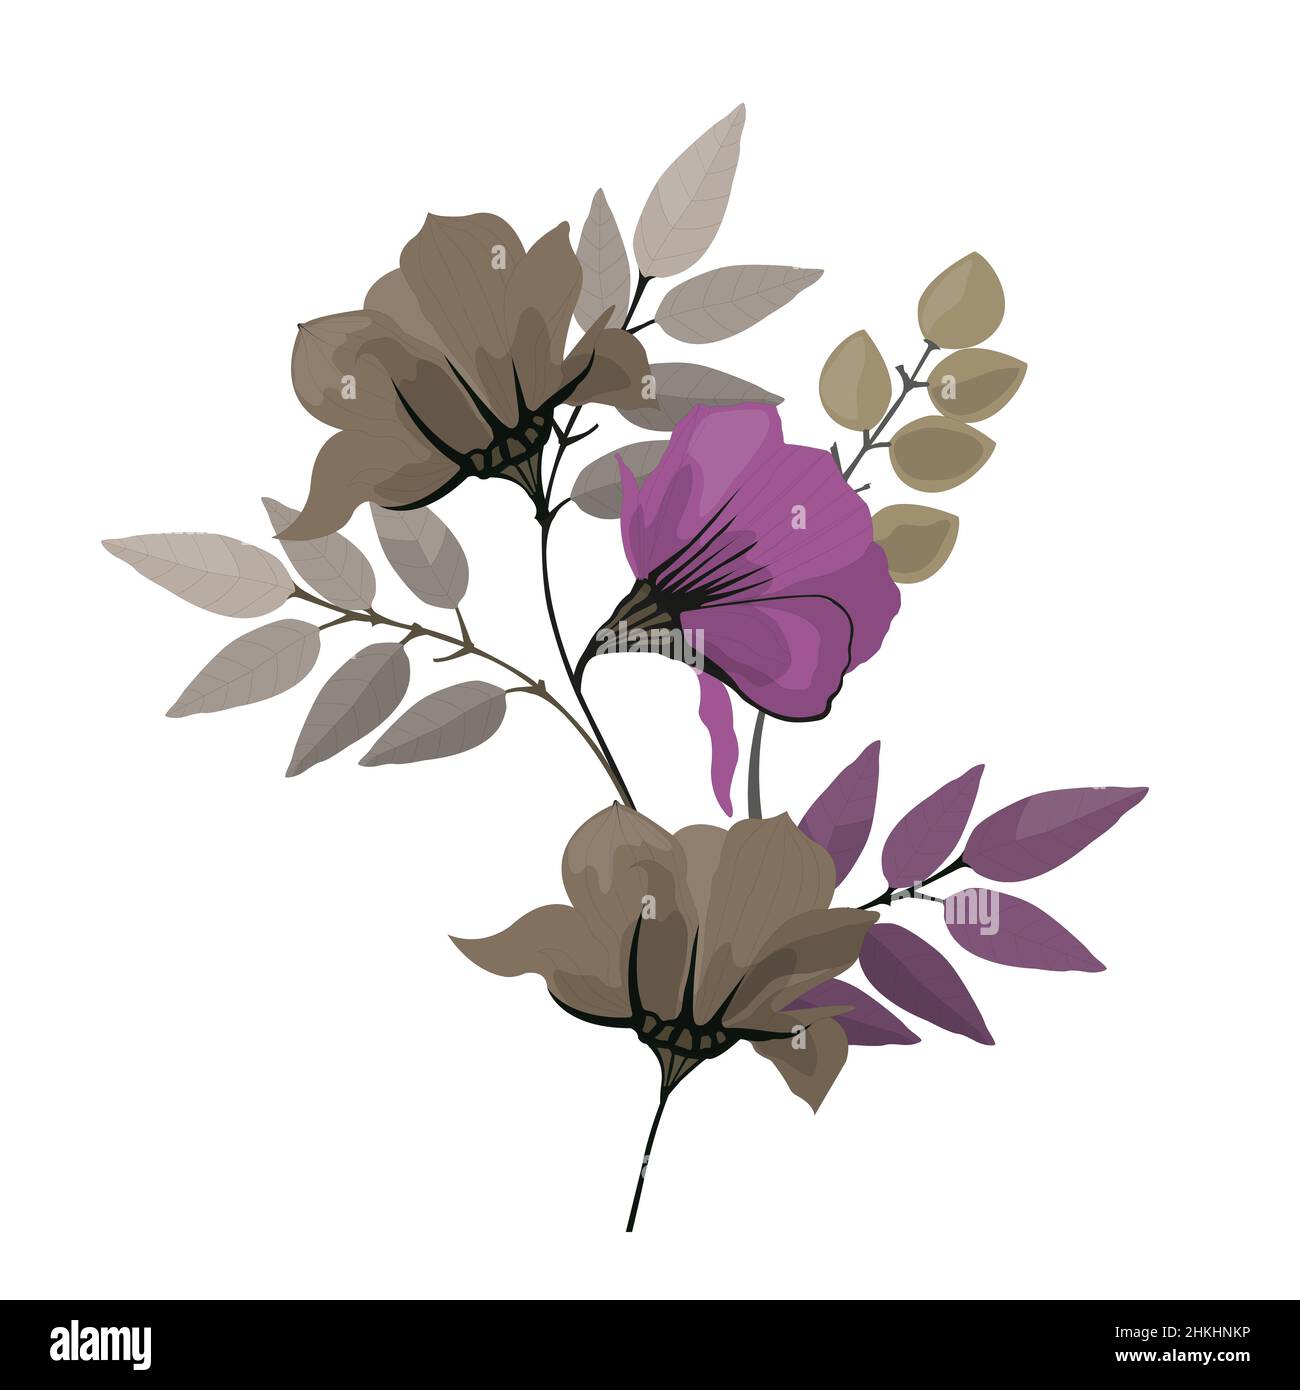 Vector floral illustration. Bouquet of purple and coffee-colored flowers and leaves. Stock Vector